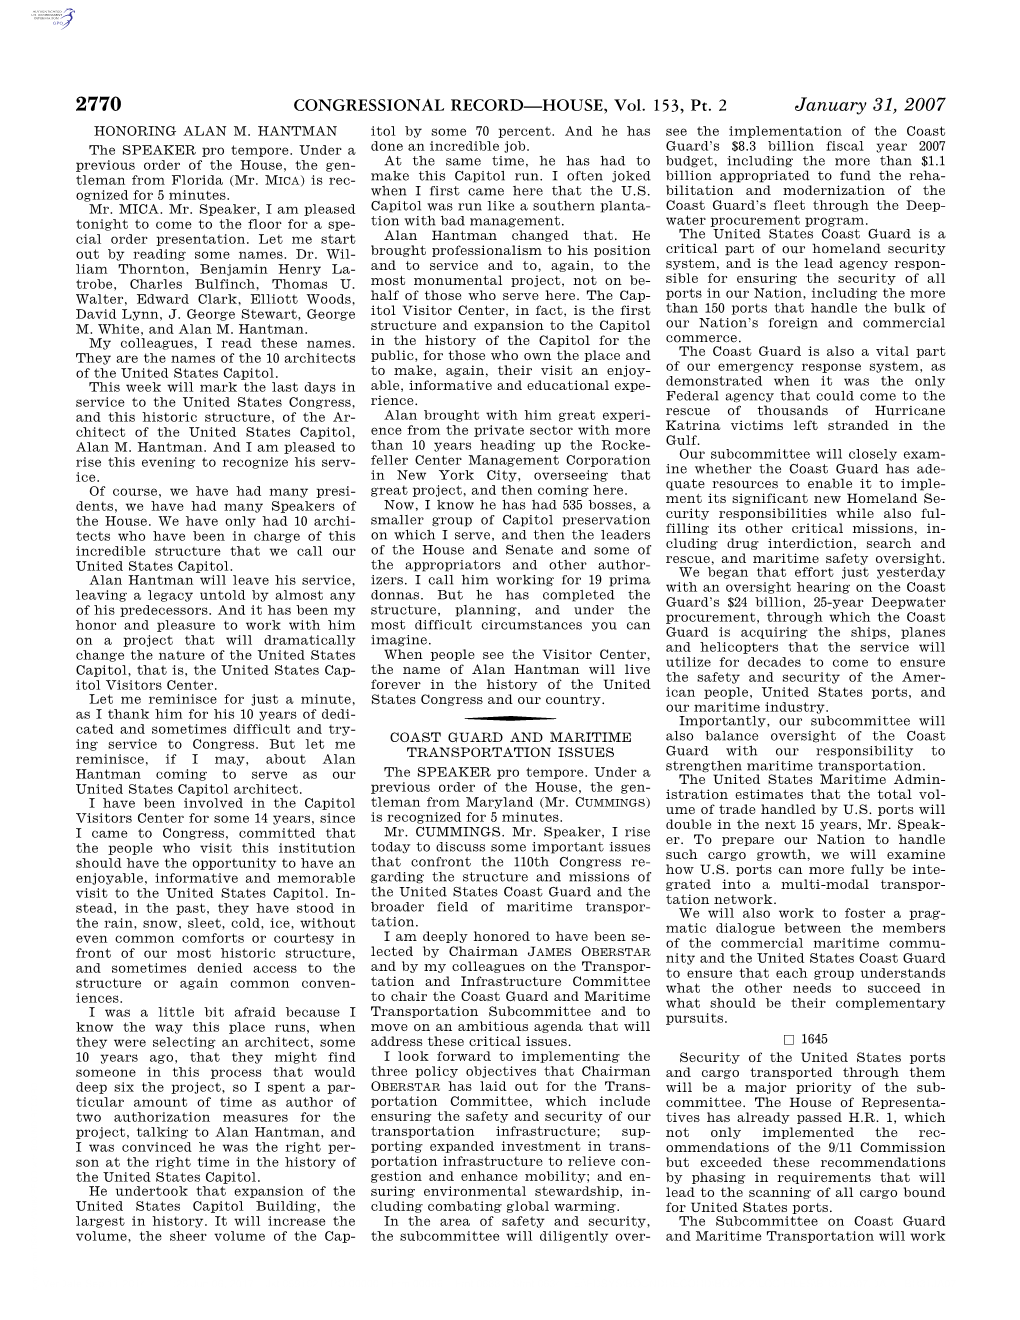 CONGRESSIONAL RECORD—HOUSE, Vol. 153, Pt. 2 January 31, 2007 HONORING ALAN M